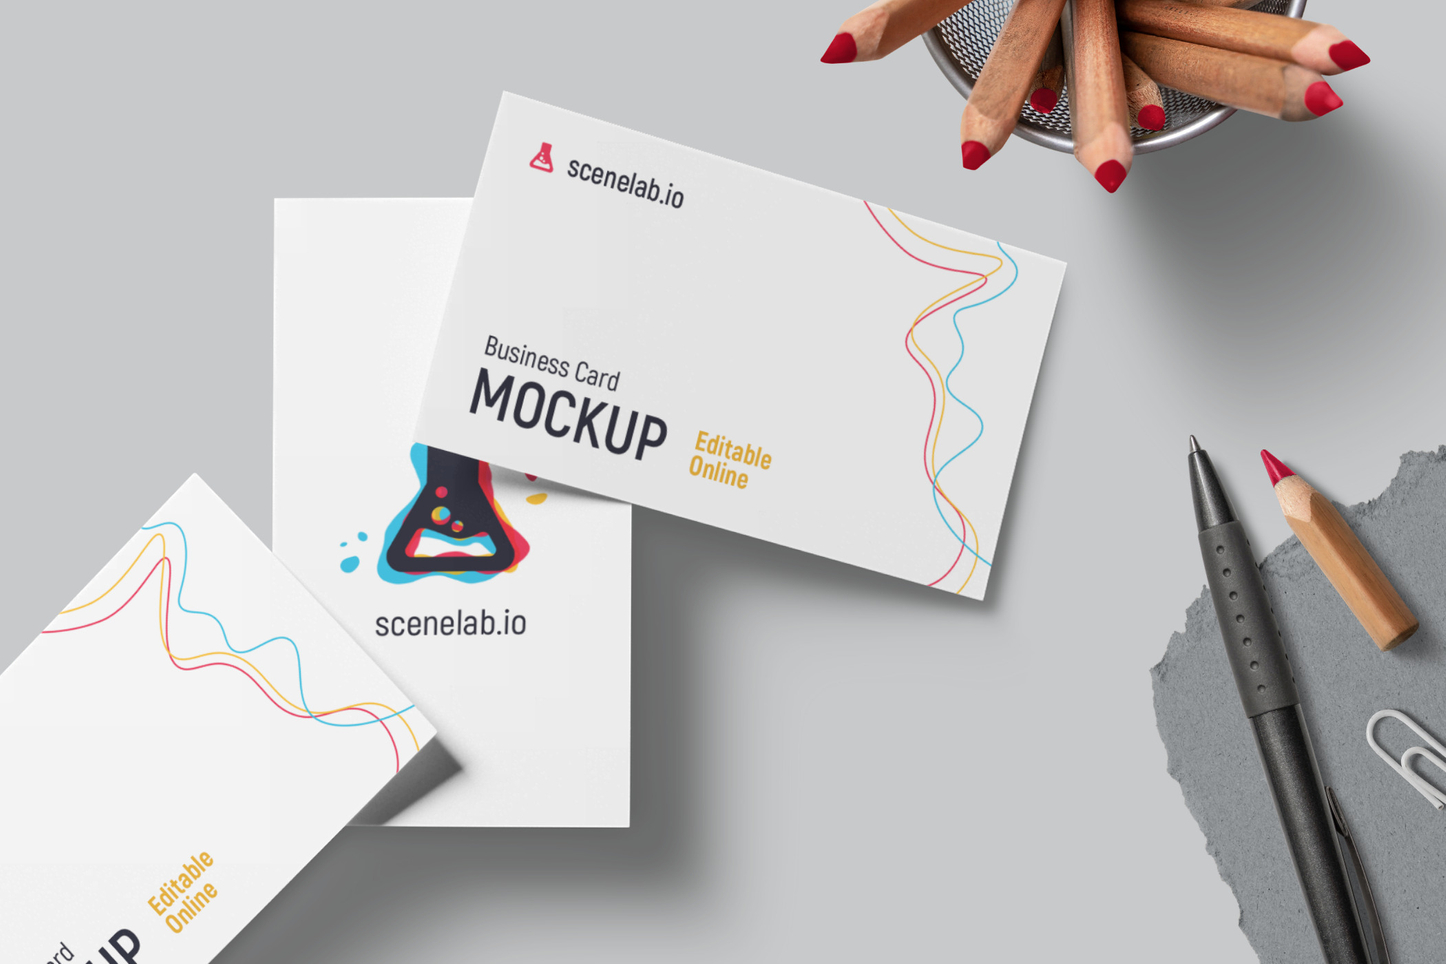 Download 5 Free Business Card Mockups Without Photoshop | SceneLab - Online mockups made easy